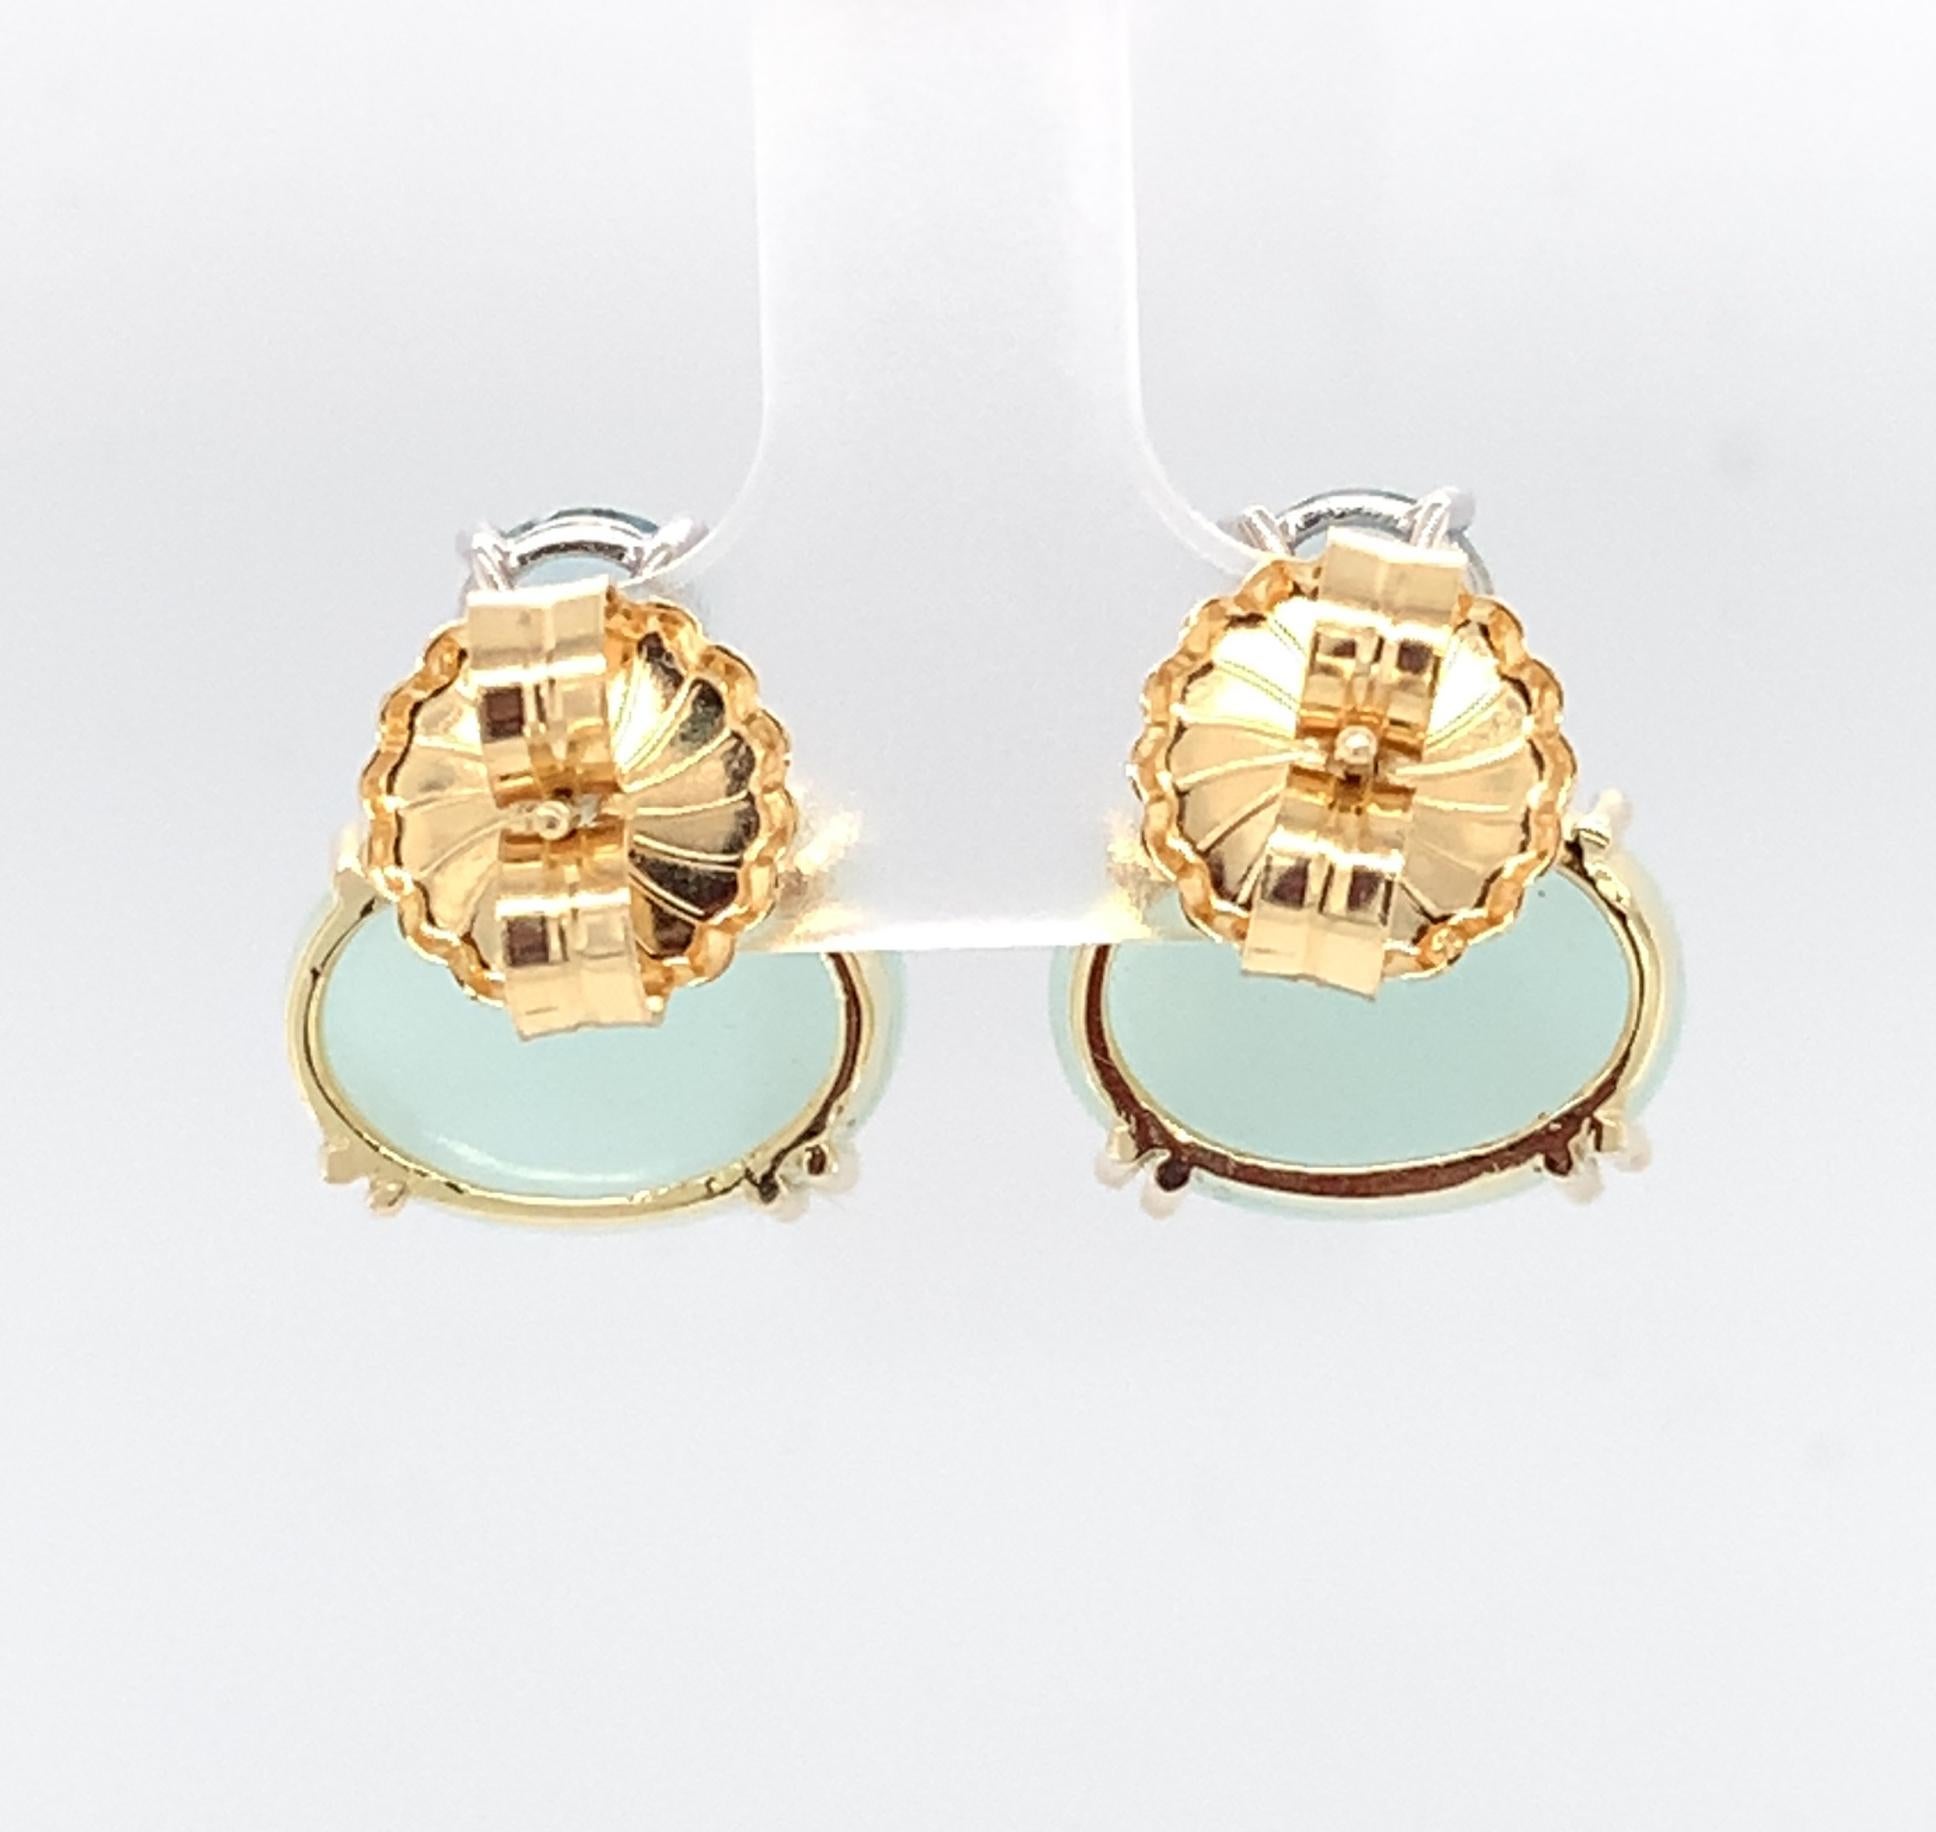 Faceted and Cabochon Aquamarine Drop Earrings in White and Yellow Gold 3